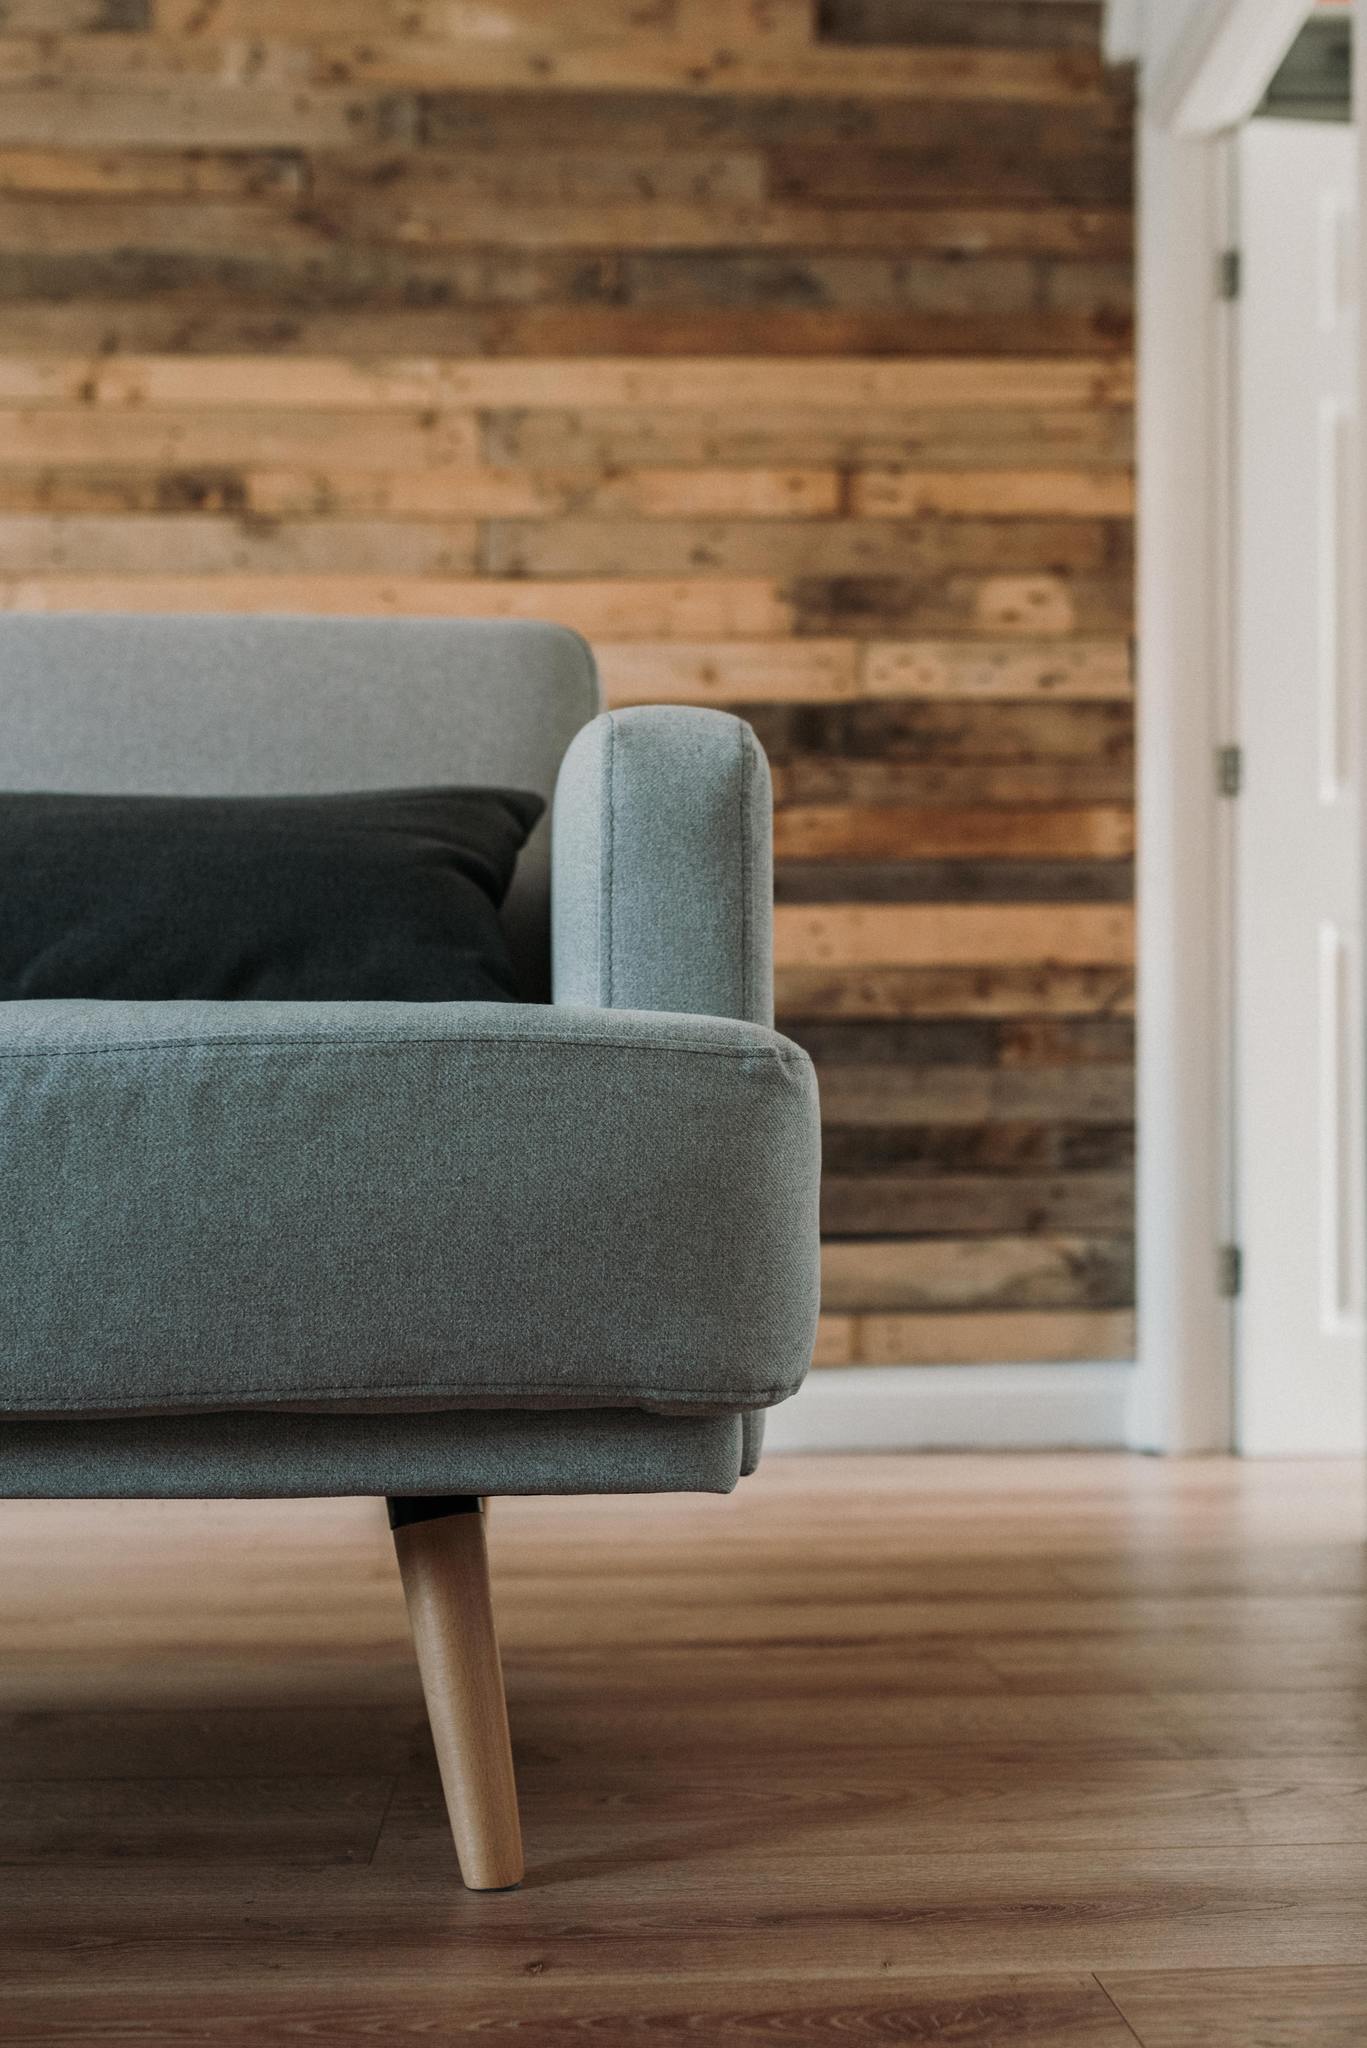 Couch on a Wood Floor with Paneling